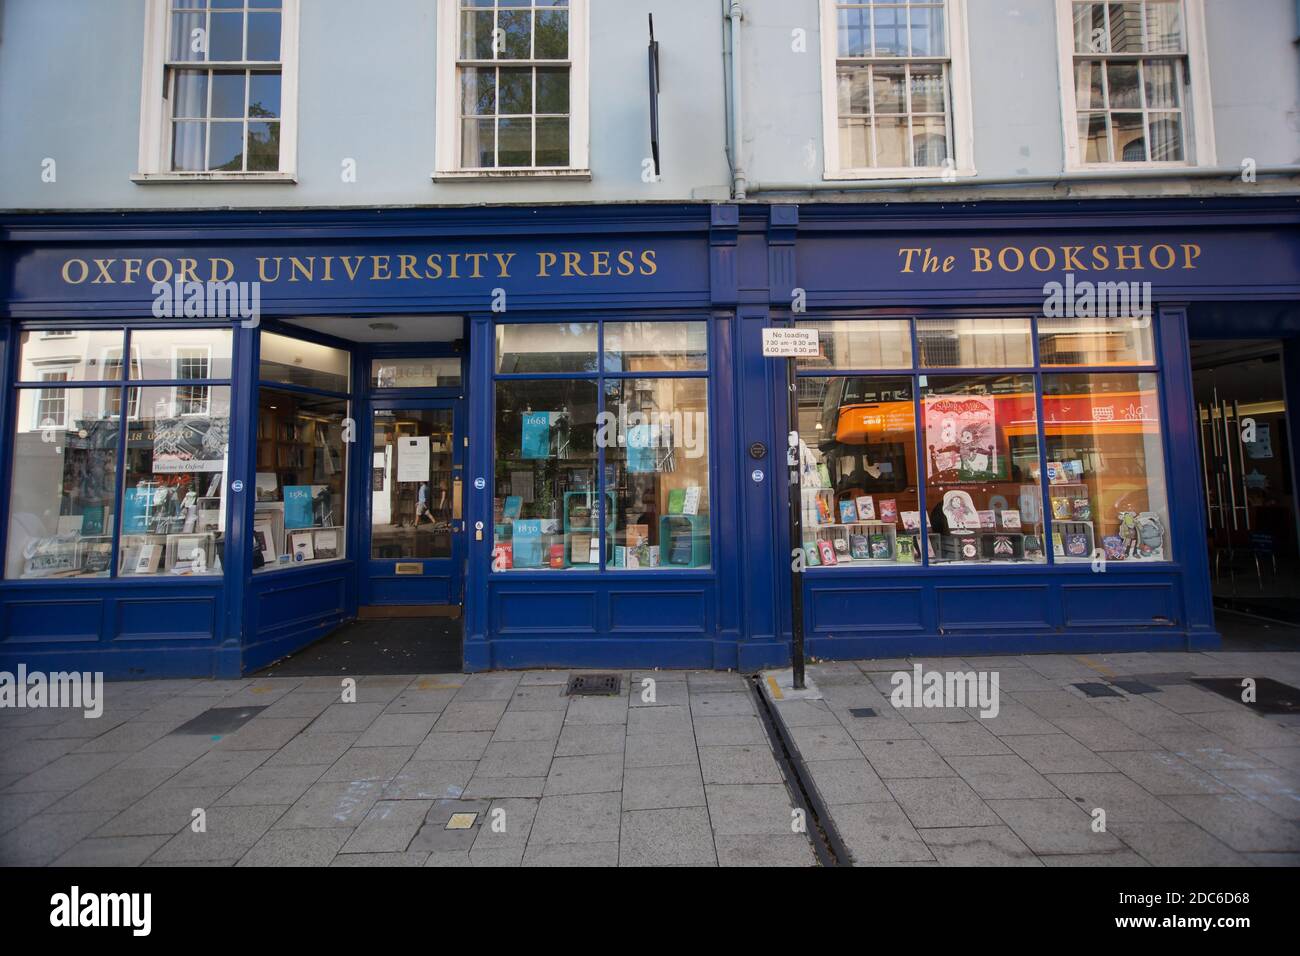 The Oxford University Press bookshop in Oxford in the UK, taken on the 15th of September 2020 Stock Photo